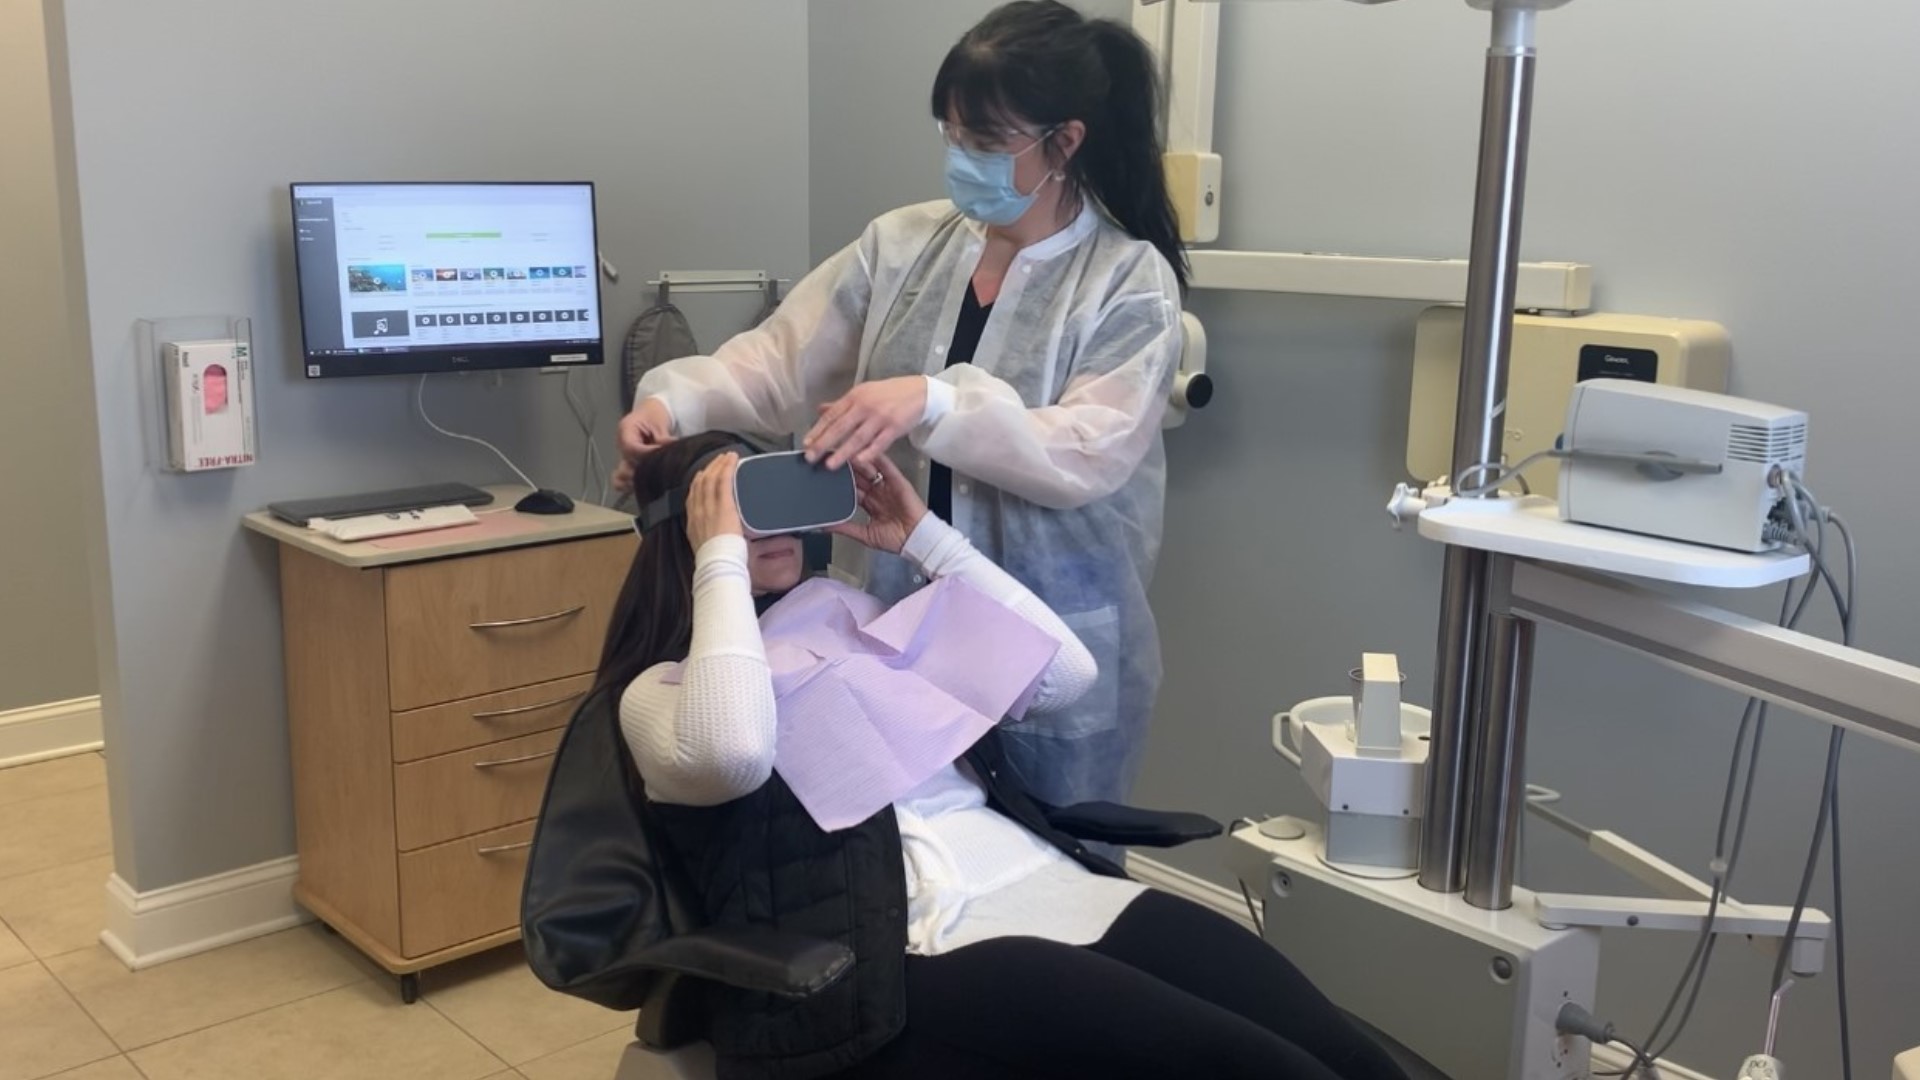 If the sounds of scraping or drilling make you nervous at the dentist, one dental pro from Scranton is getting quite creative with technology to help patients relax.